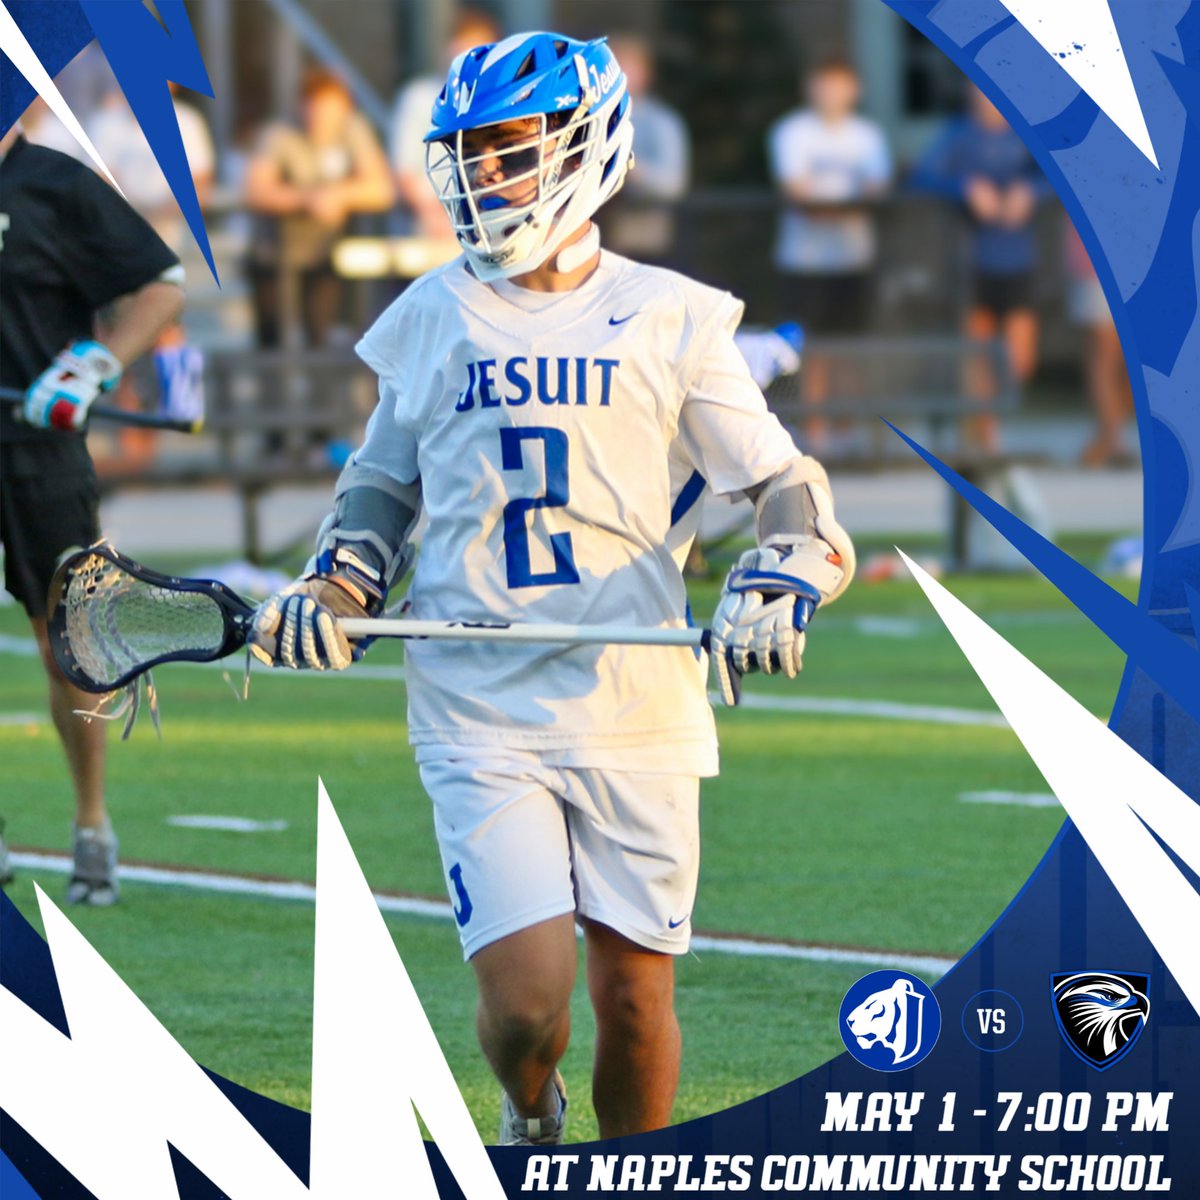 If you can't make it to Naples for the Region Semifinal tonight at @CSNSeahawks, the game is expected to be livestreamed on the school's athletics YouTube channel: youtube.com/@CSNSeahawkAth… #AMDG #GoTigers #JesuitLacrosse